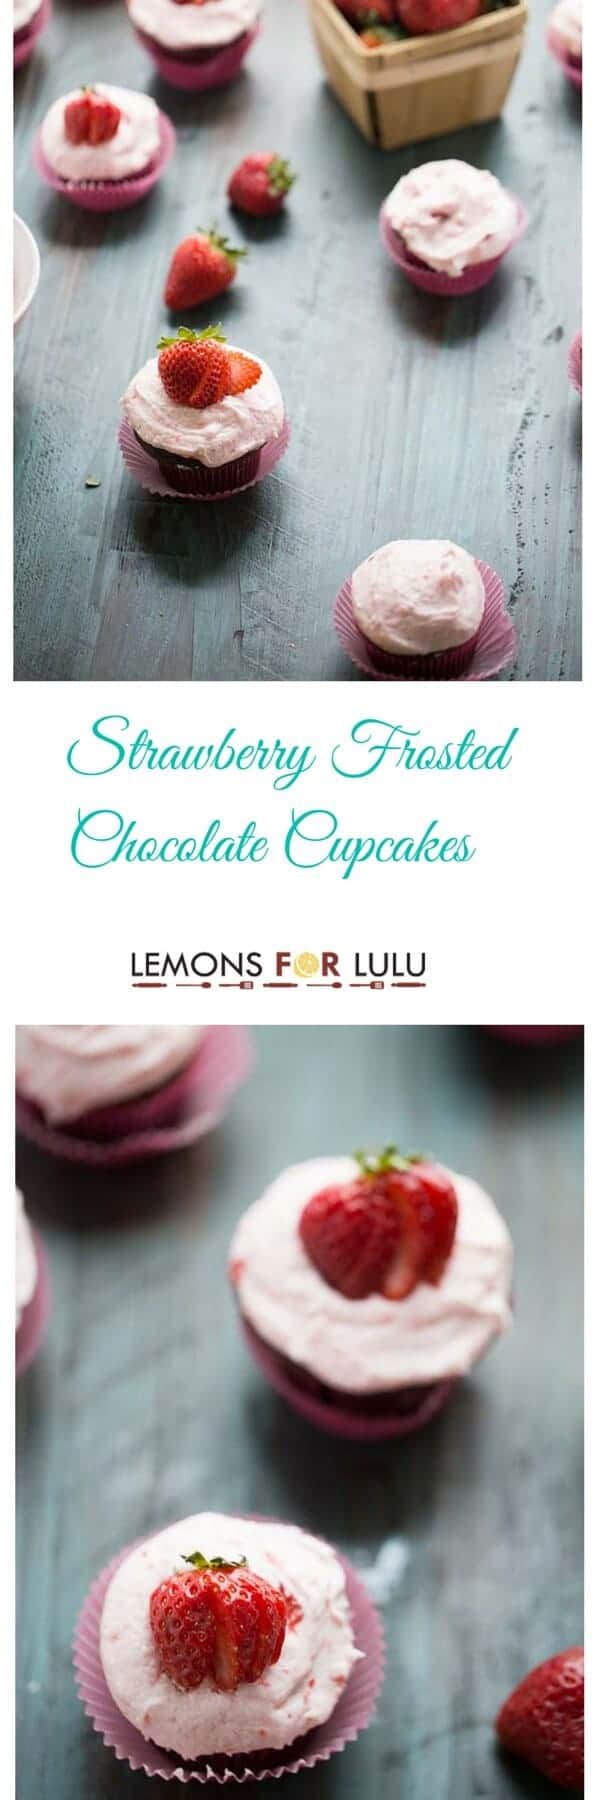 Strawberry frosting covers easy chocolate cupcakes. This buttercream recipe is full of fresh strawberries, it is so creamy and so flavorful, it’s like dessert all on it’s own! lemonsforlulu.com